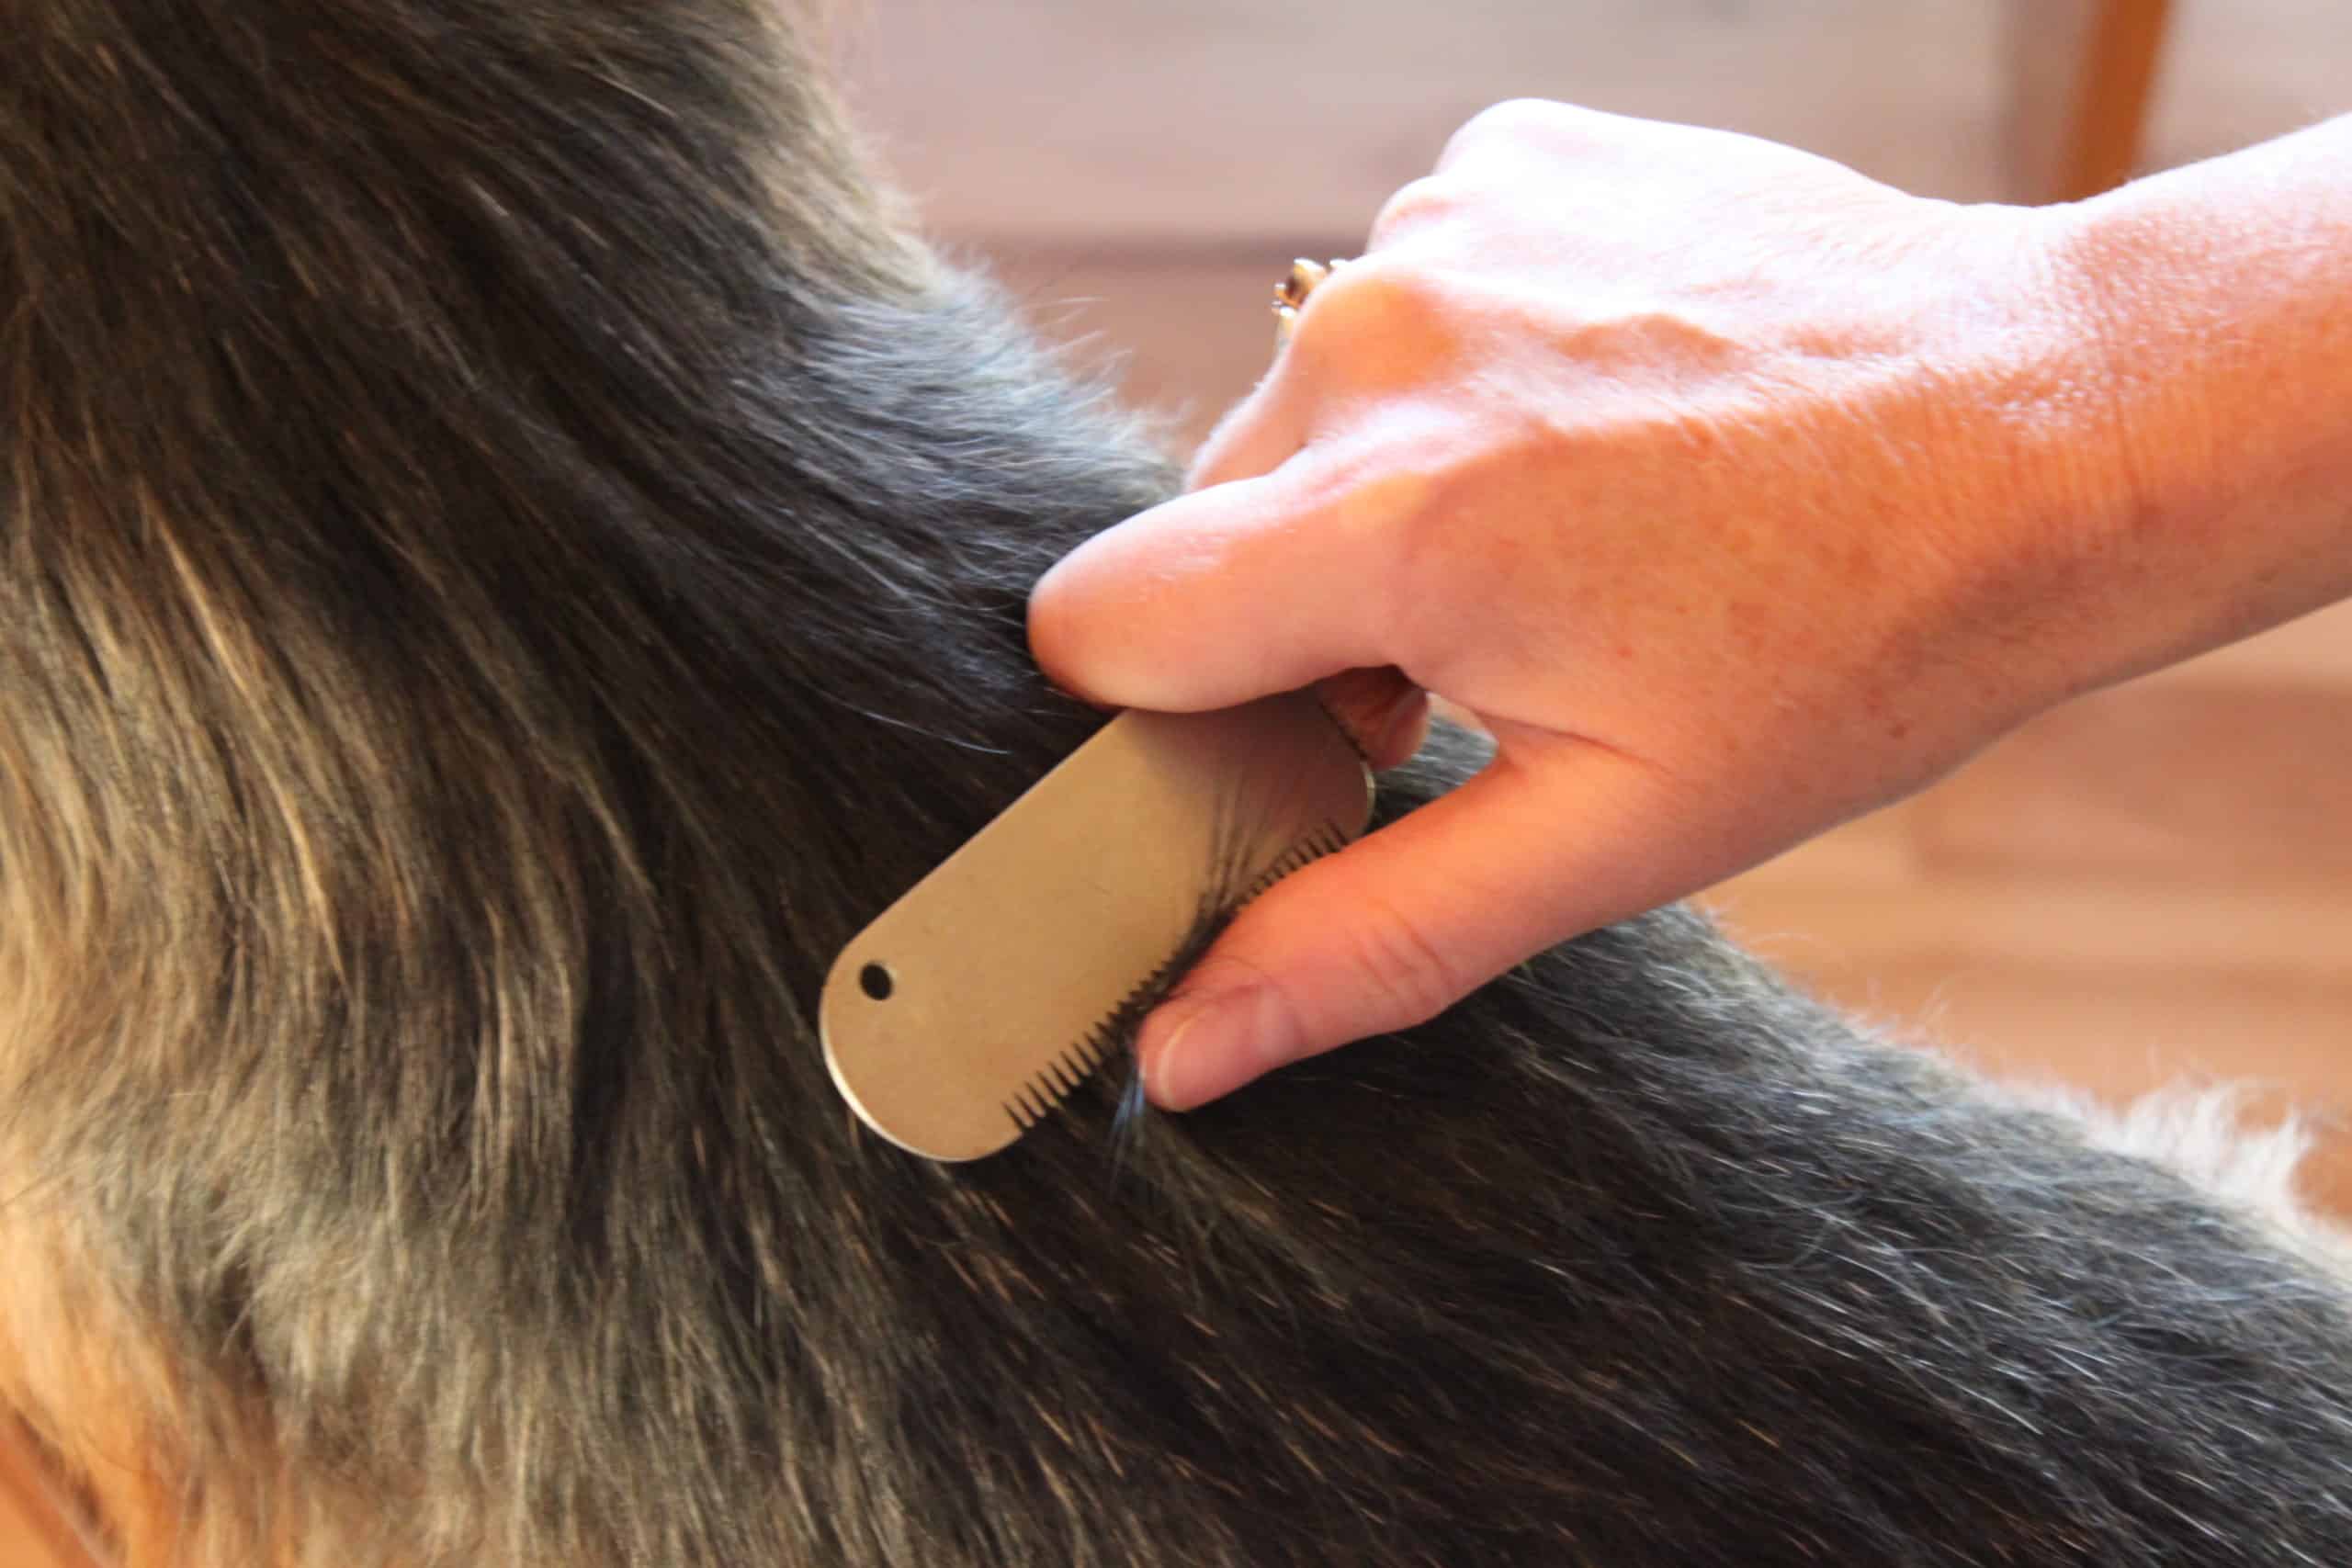 carding and combing a dog's coat